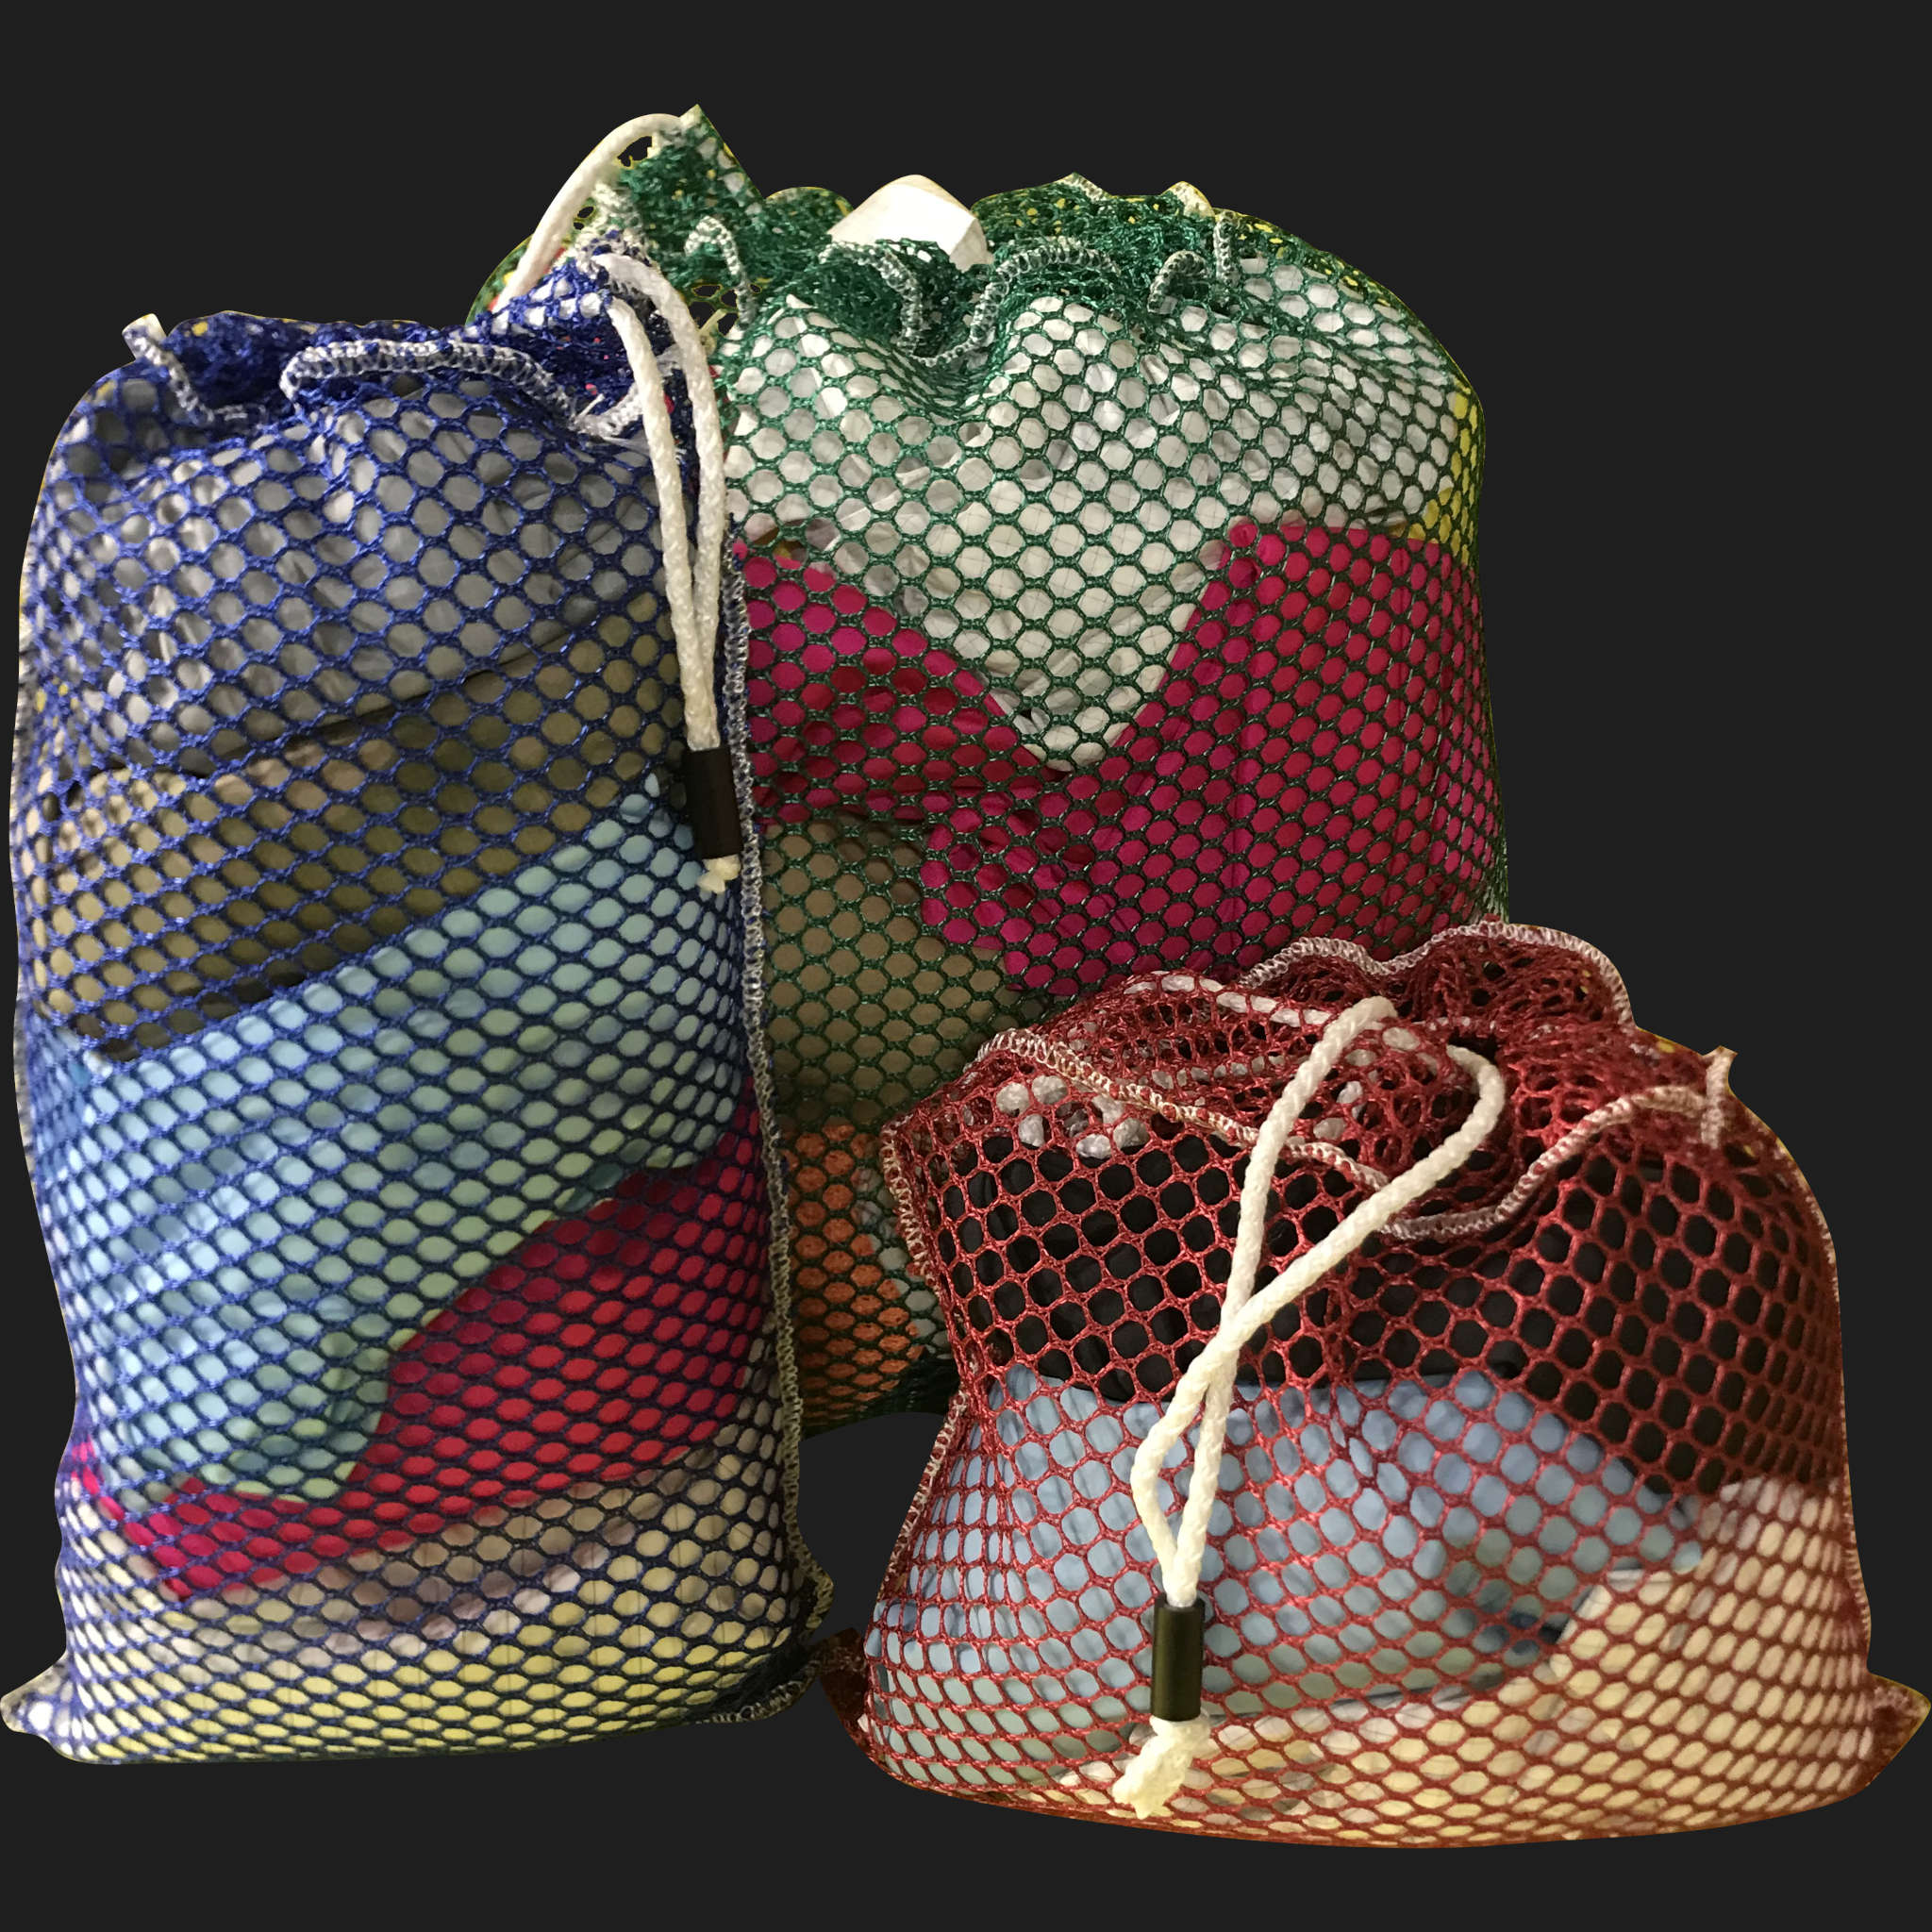 48" x 72" Customized Mesh-Net-Laundry Bags Heavy Duty with Cord and barrellock closure